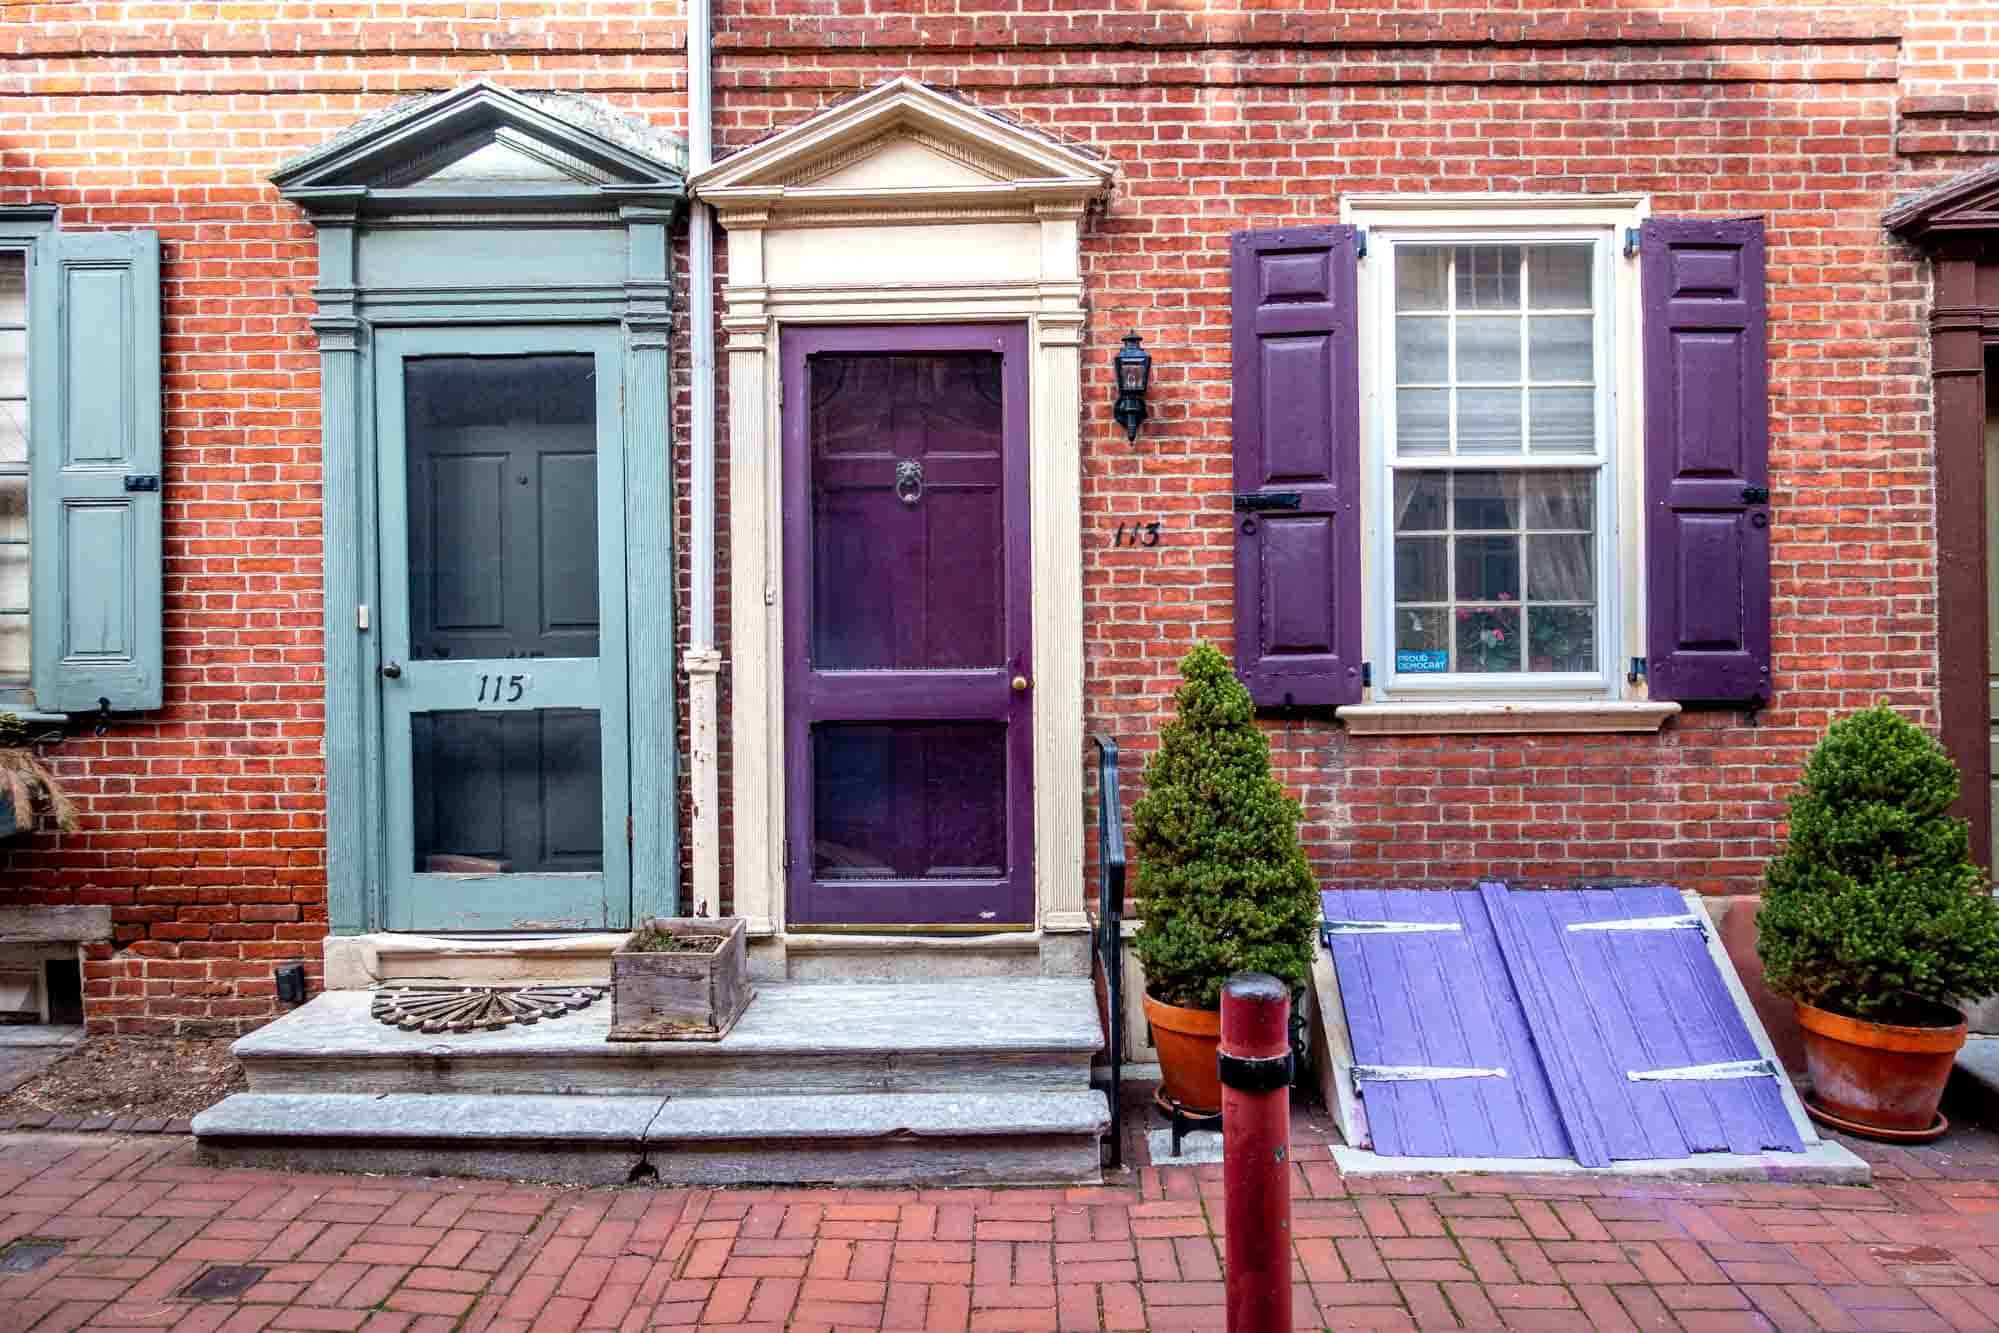 The pretty colorful homes in the colonial-era Elfreth's Alley